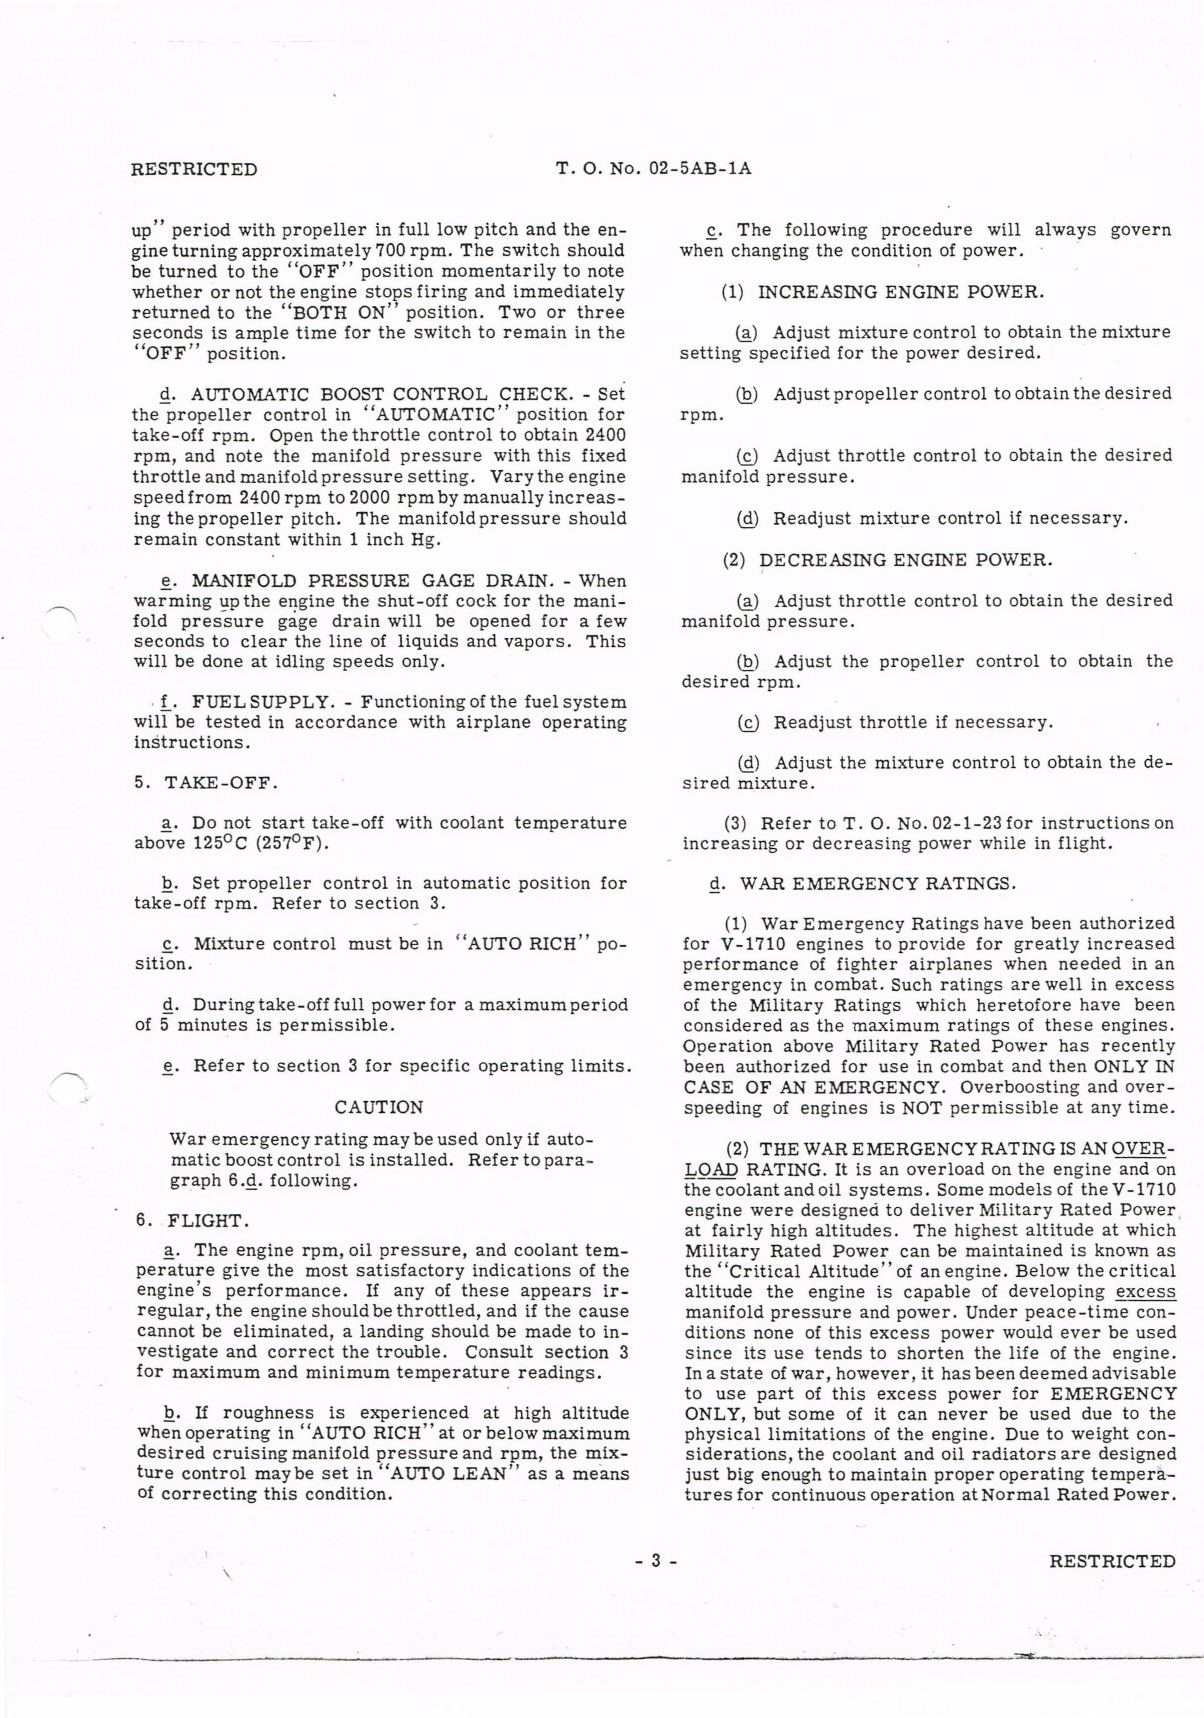 Sample page 7 from AirCorps Library document: Operating Instructions for V-1710-39, V-1710-73, and V-1710-81 Engines